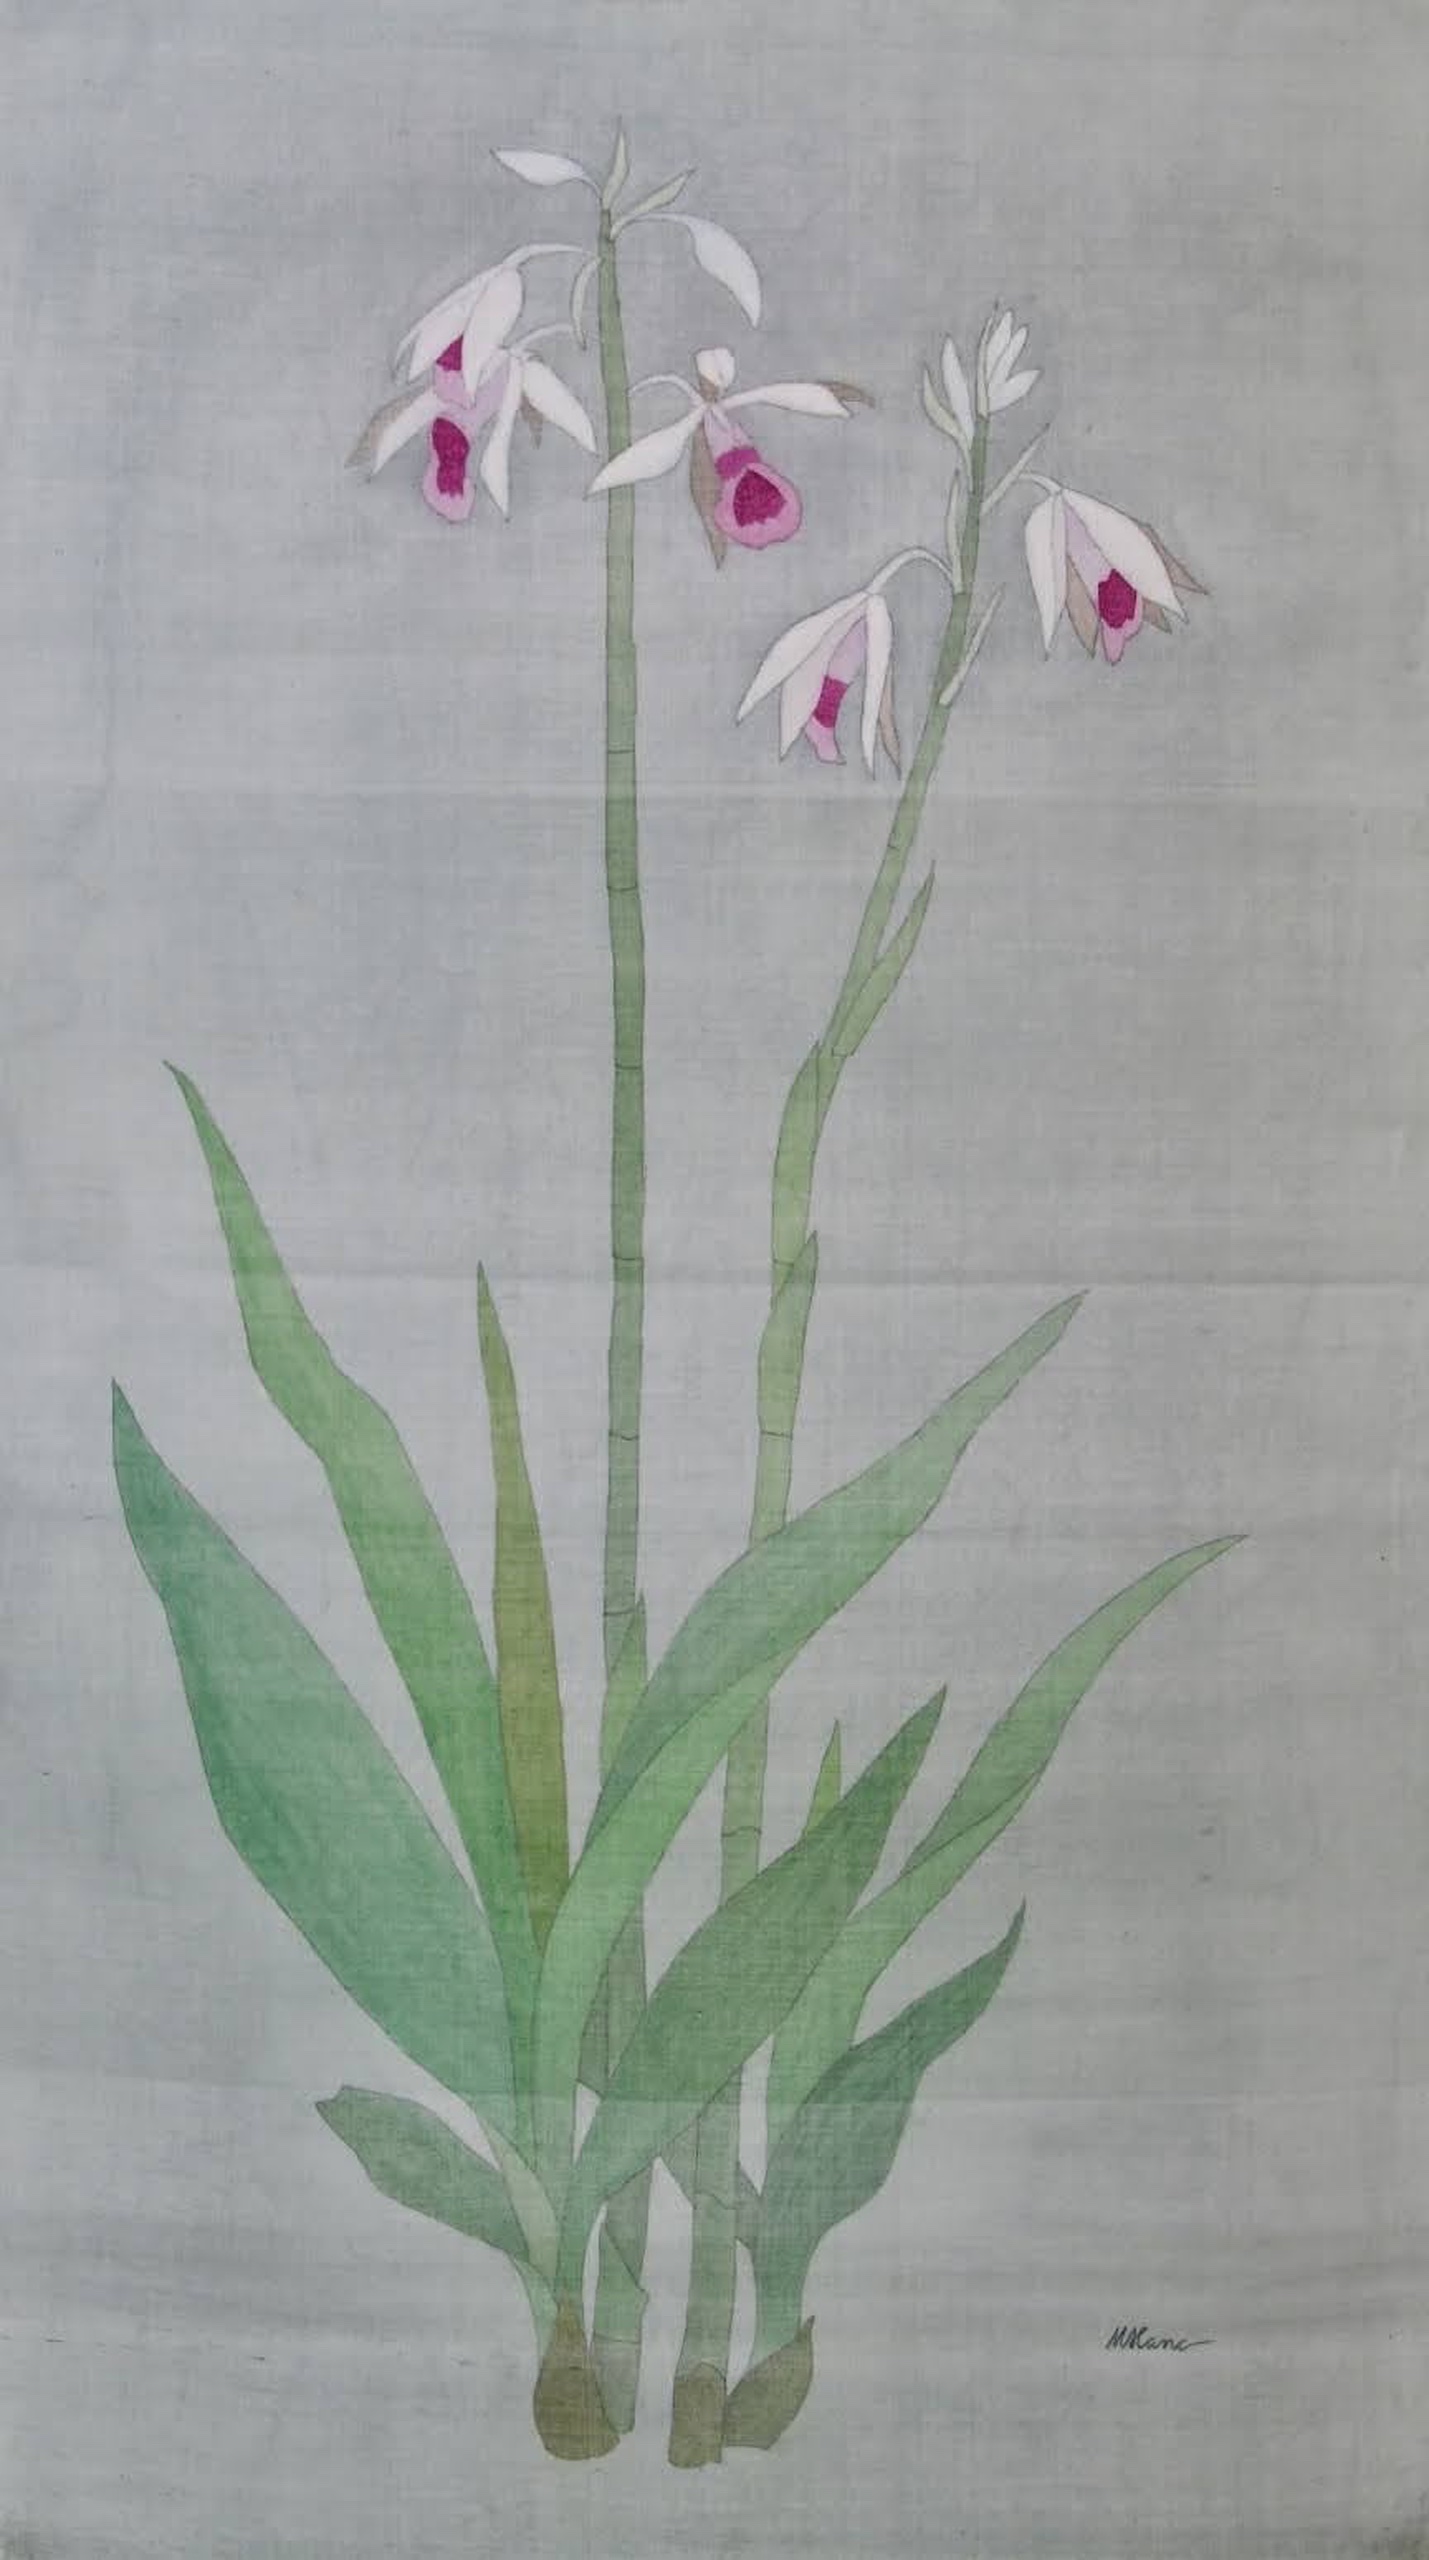 Paphiopedilum, silk painting, 68cmx120cm by the artist Hoang Minh Hang in a supplied photo.